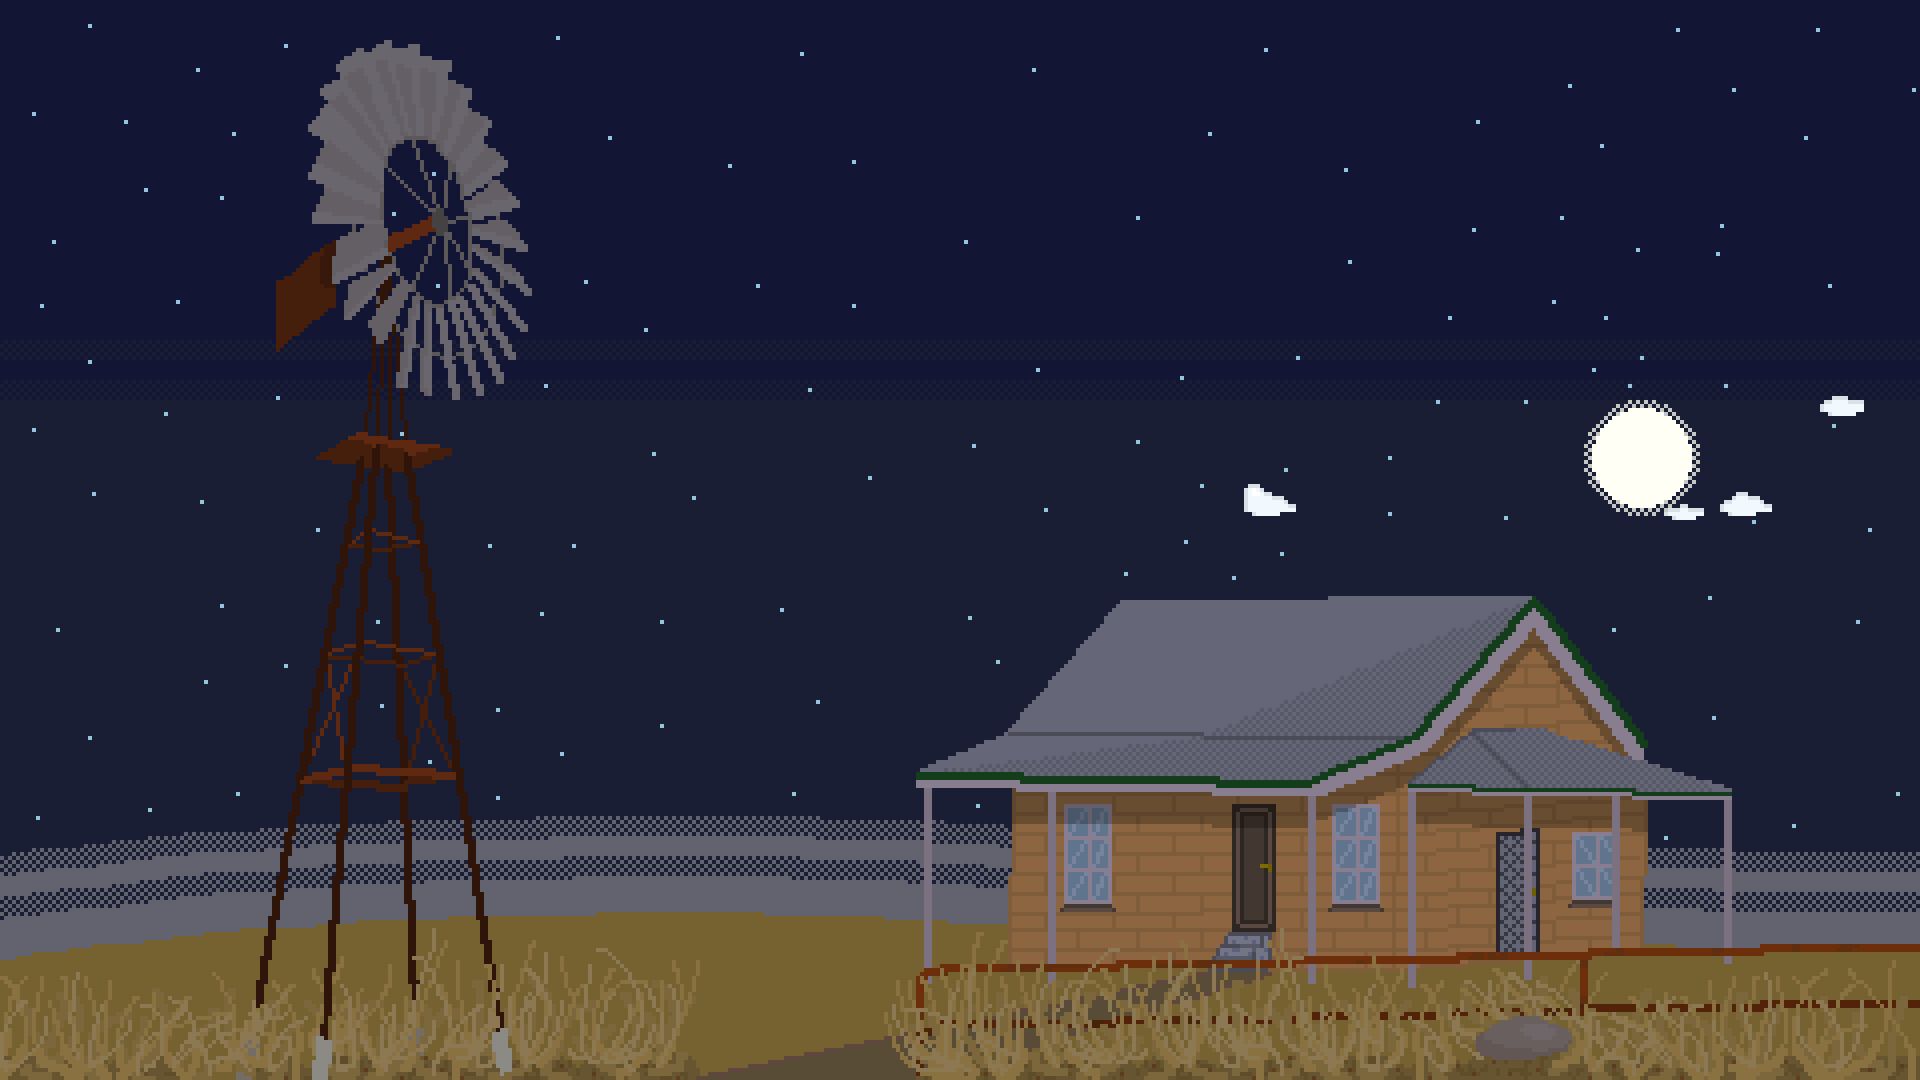 A pixel art image of a windmill and a house at night. - Pixel art